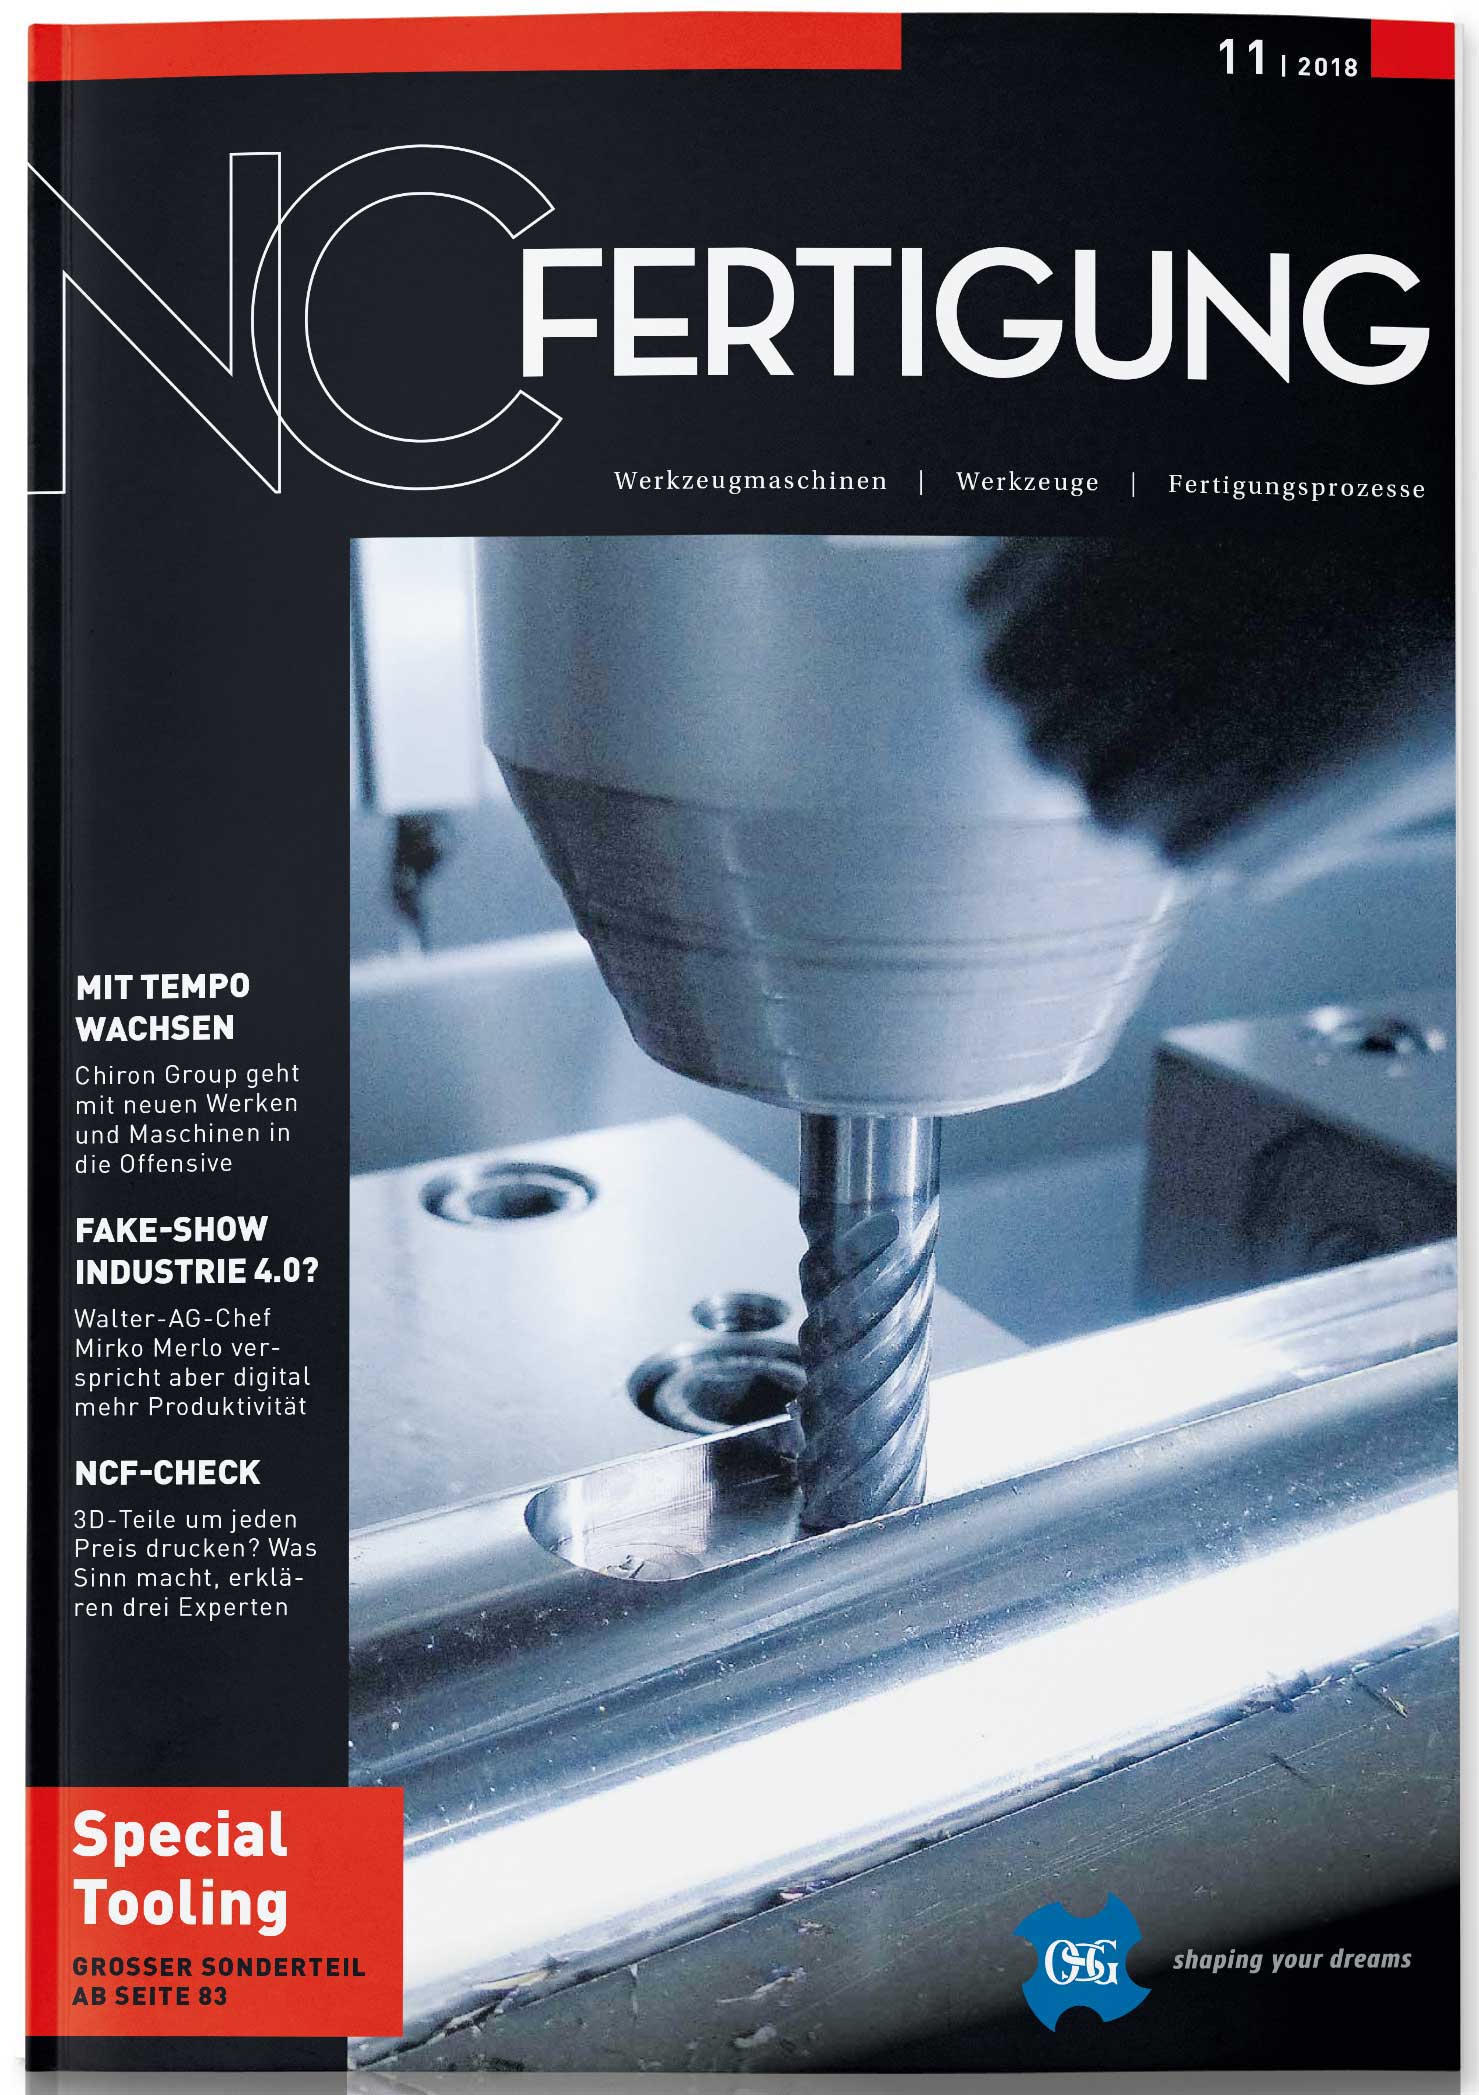 Article from the trade journal NC Fertigung / issue 11/2018